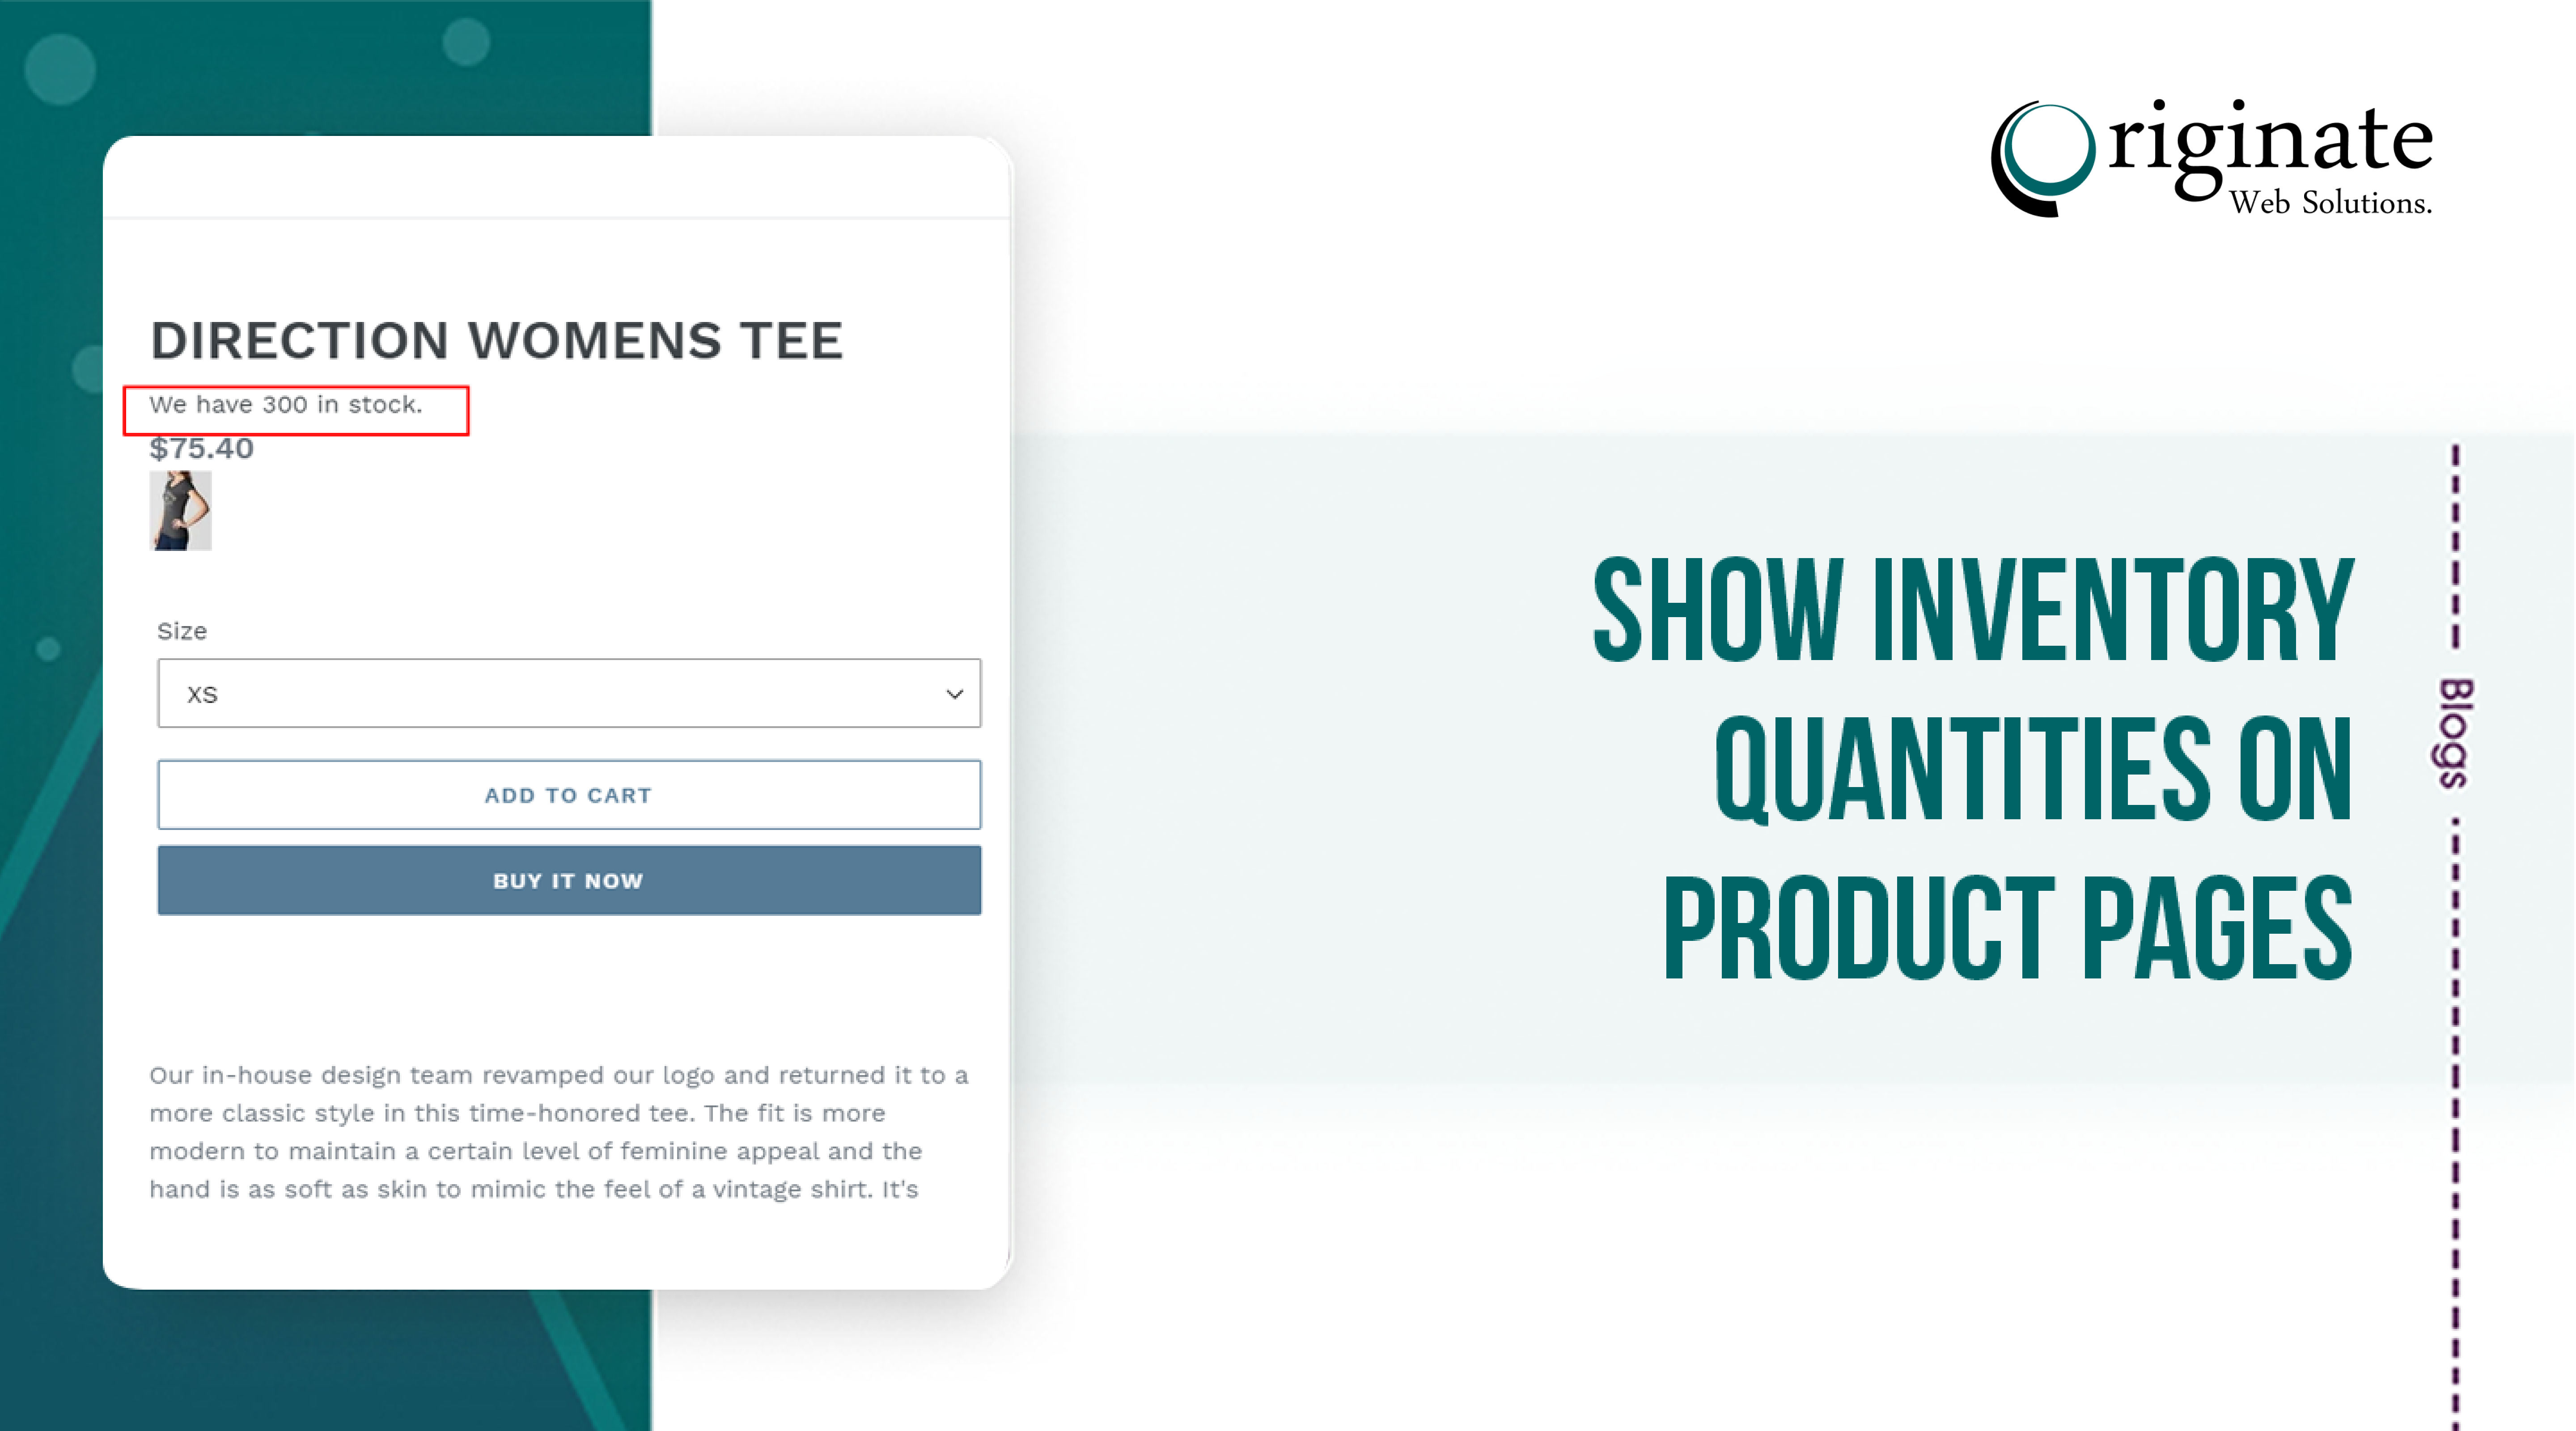 Show inventory quantities on product pages